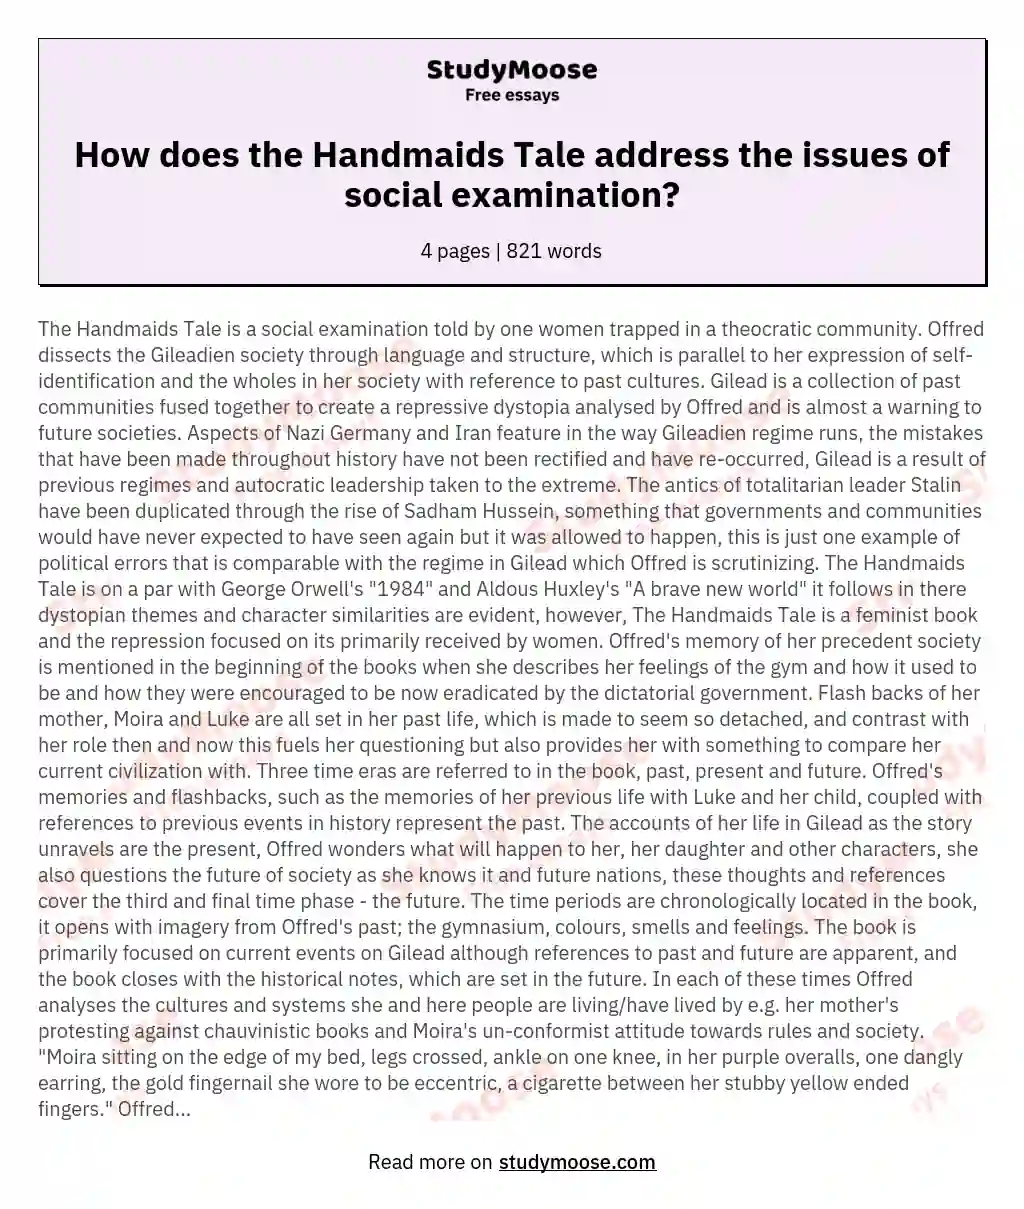 How does the Handmaids Tale address the issues of social examination? essay